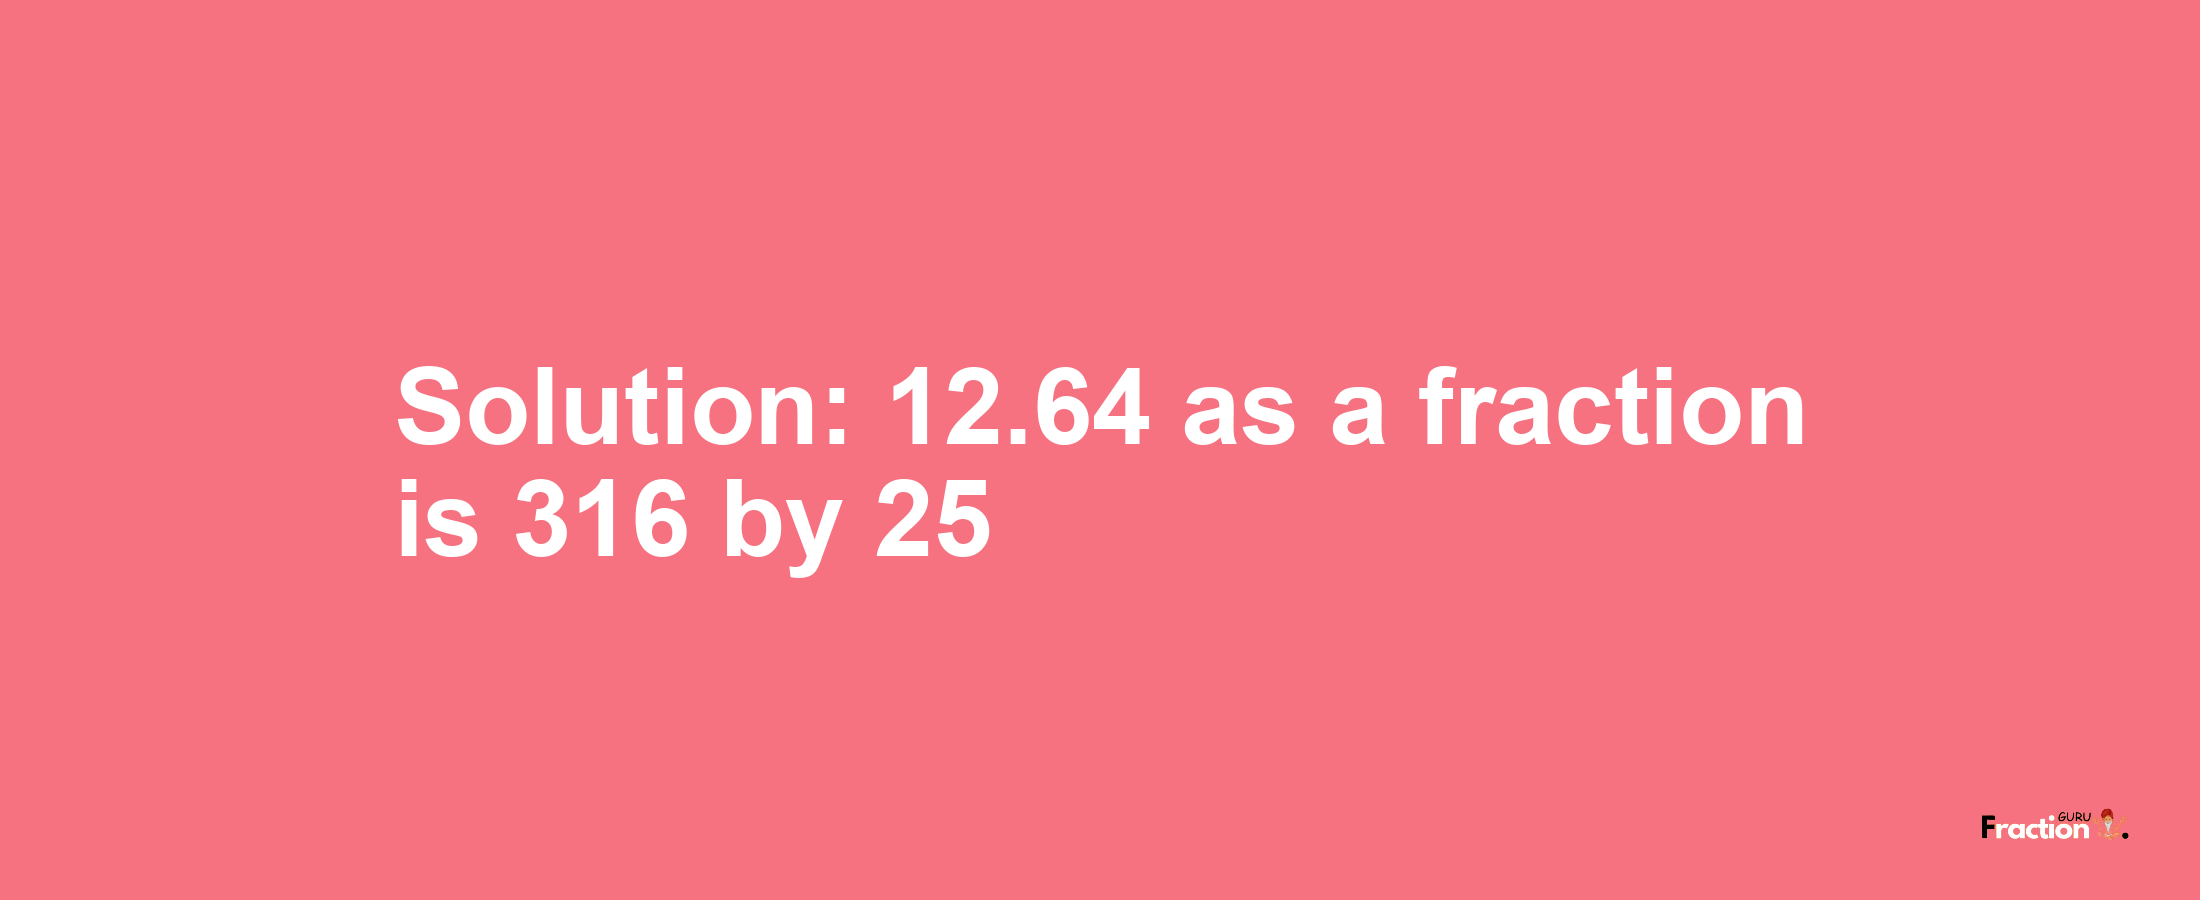 Solution:12.64 as a fraction is 316/25